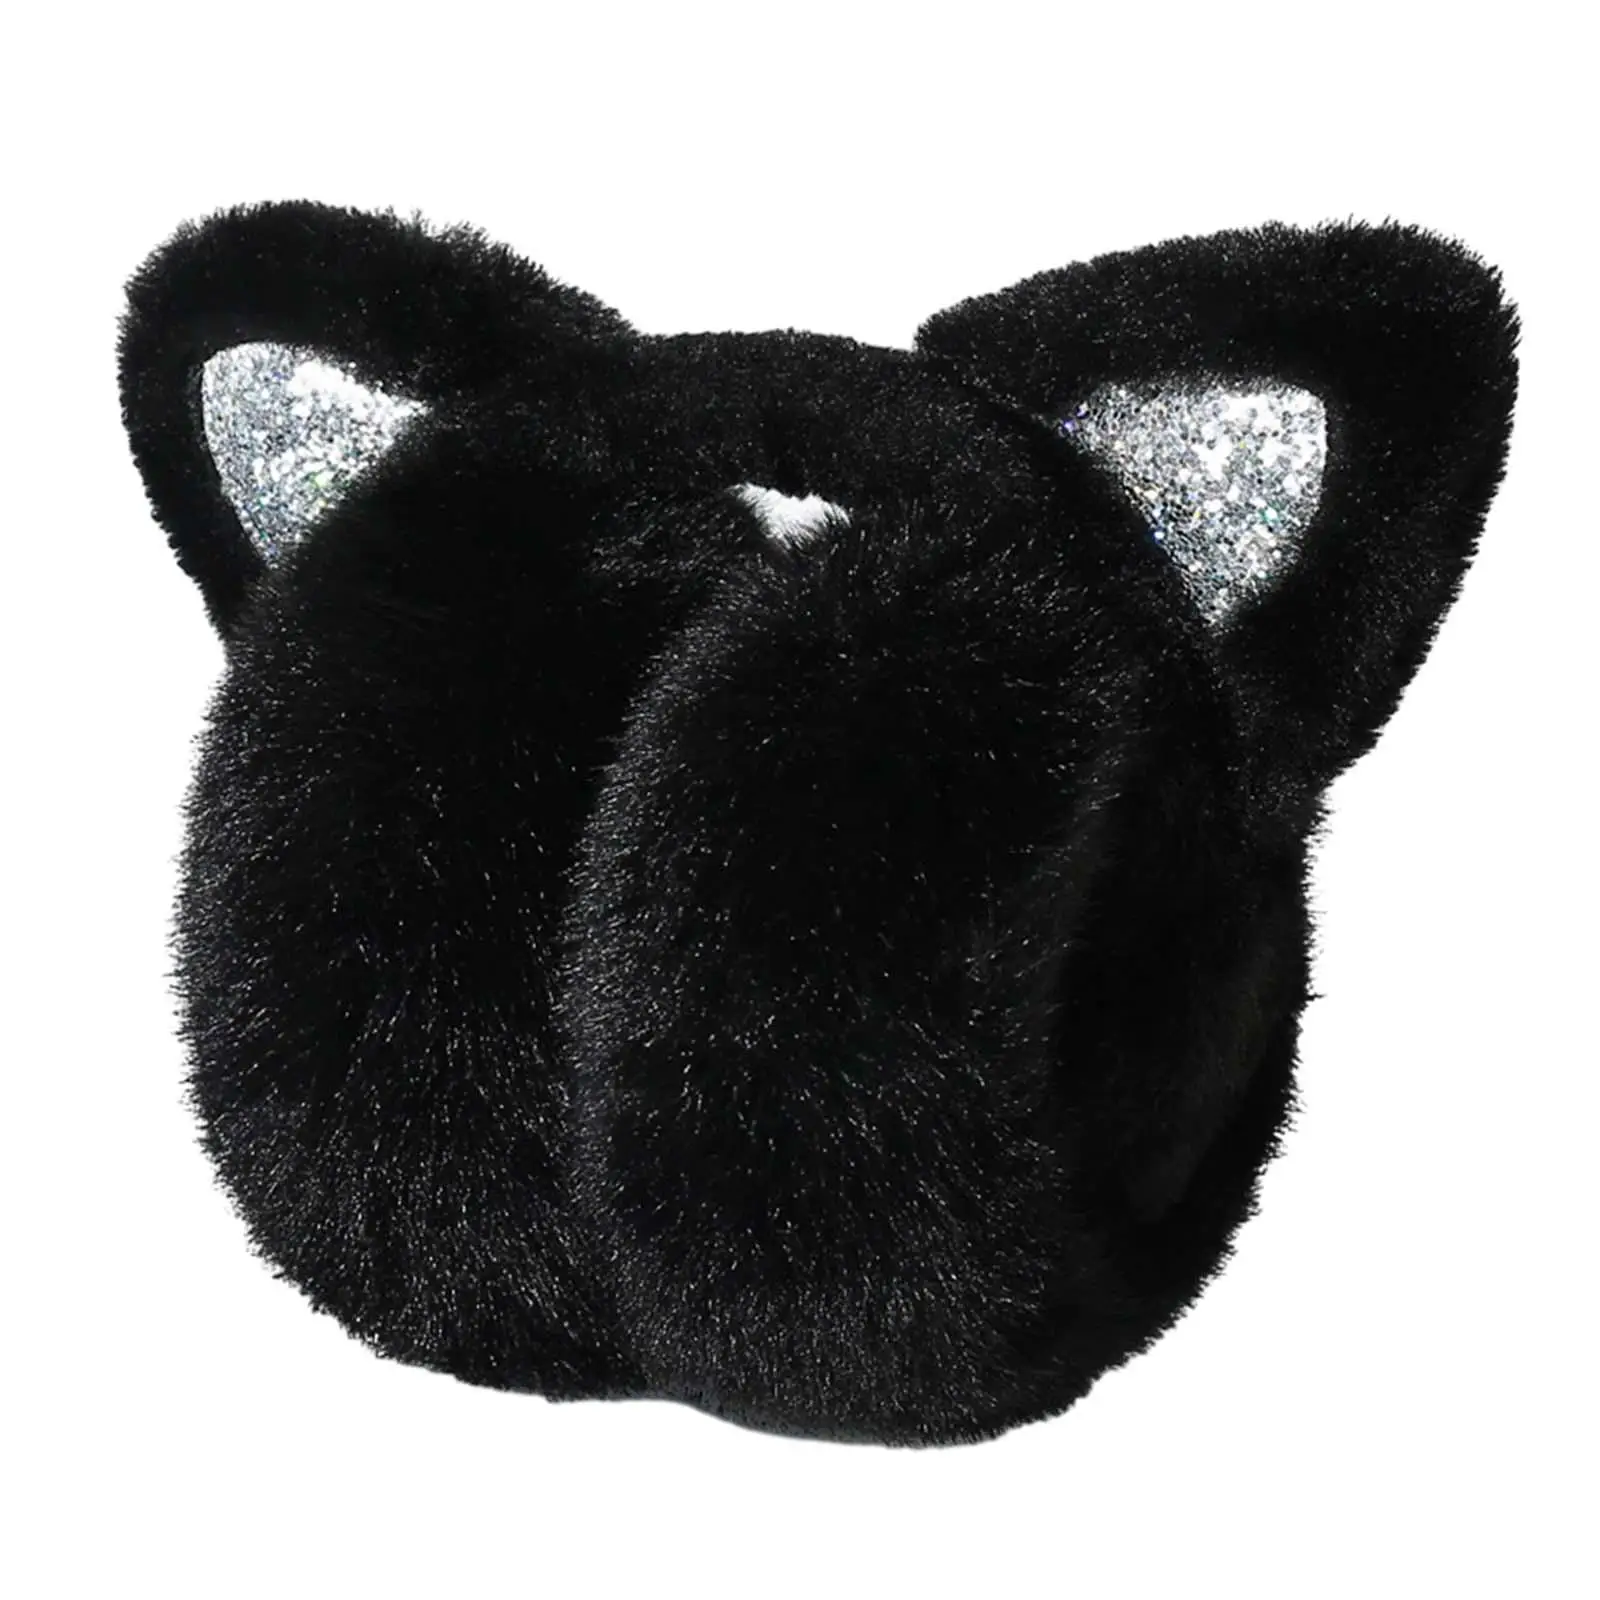 Ear Warmers Warm Folded Comfortable Earmuffs Winter Ear Muffs Ear Cover for Skiing Outdoor Activities Riding Traveling Skating